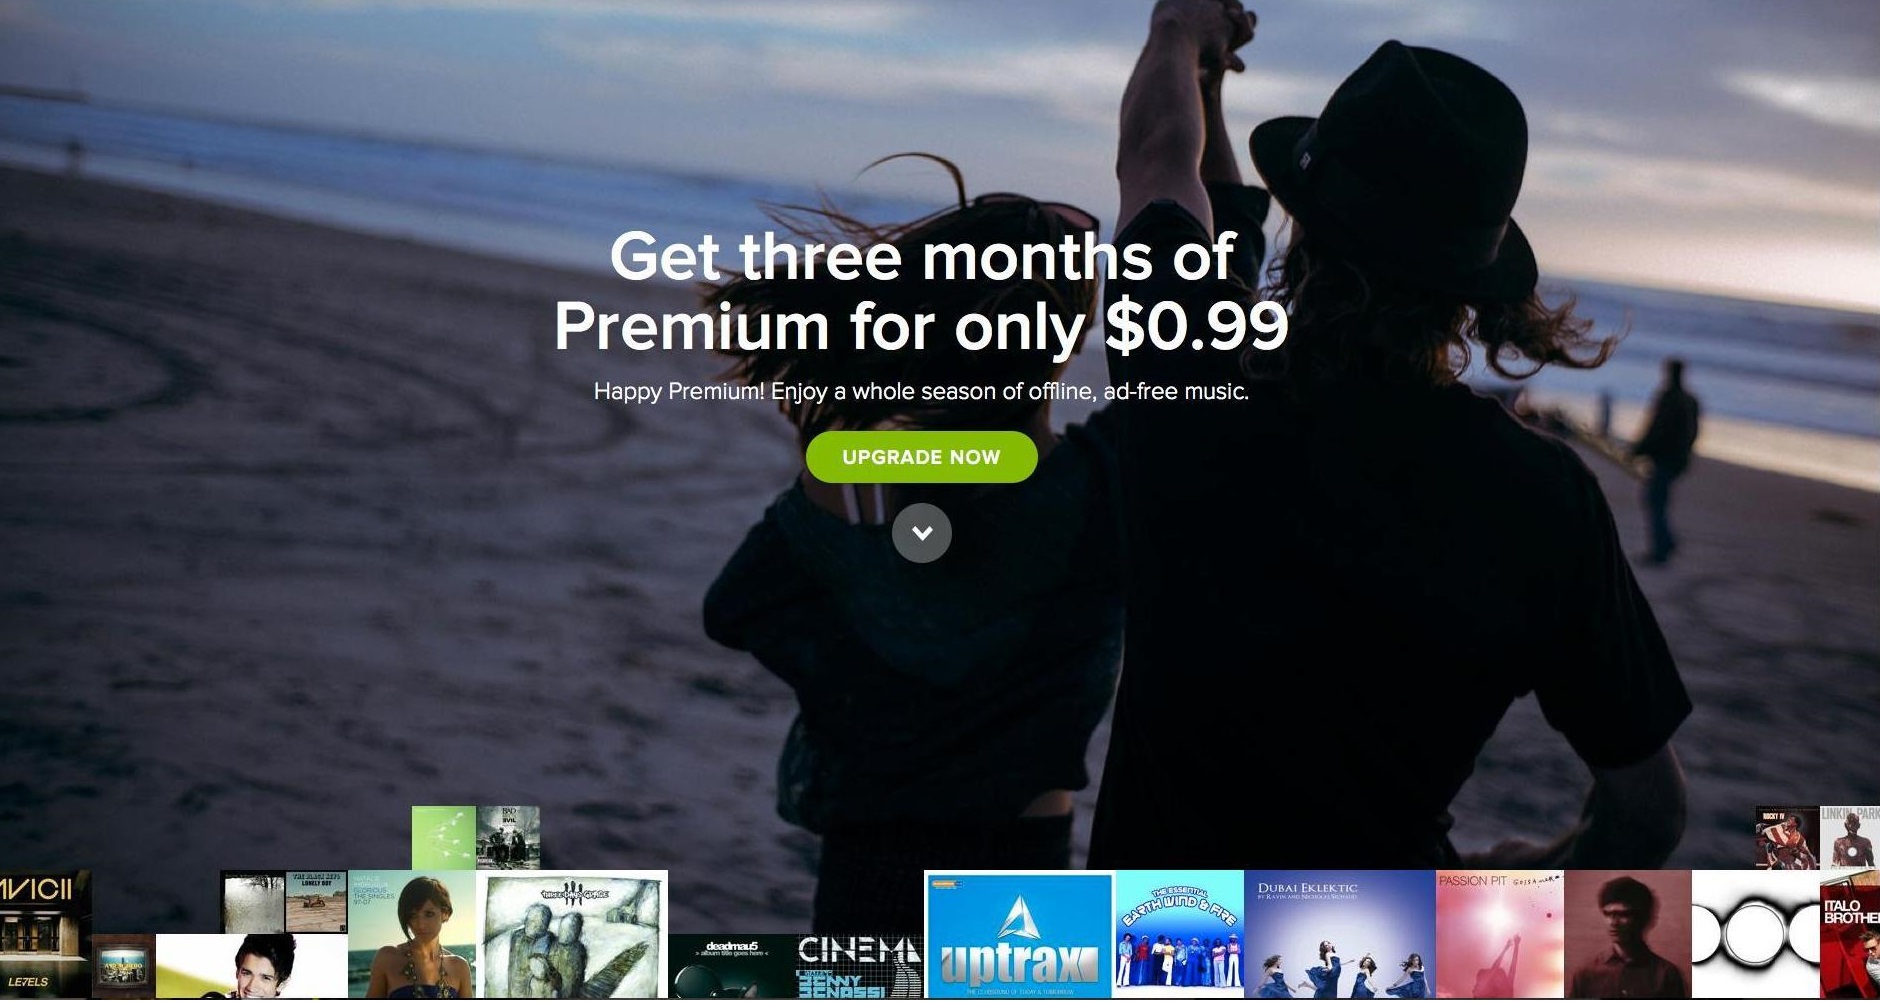 Spotify Offering 3 Months of Premium for 99 Cents